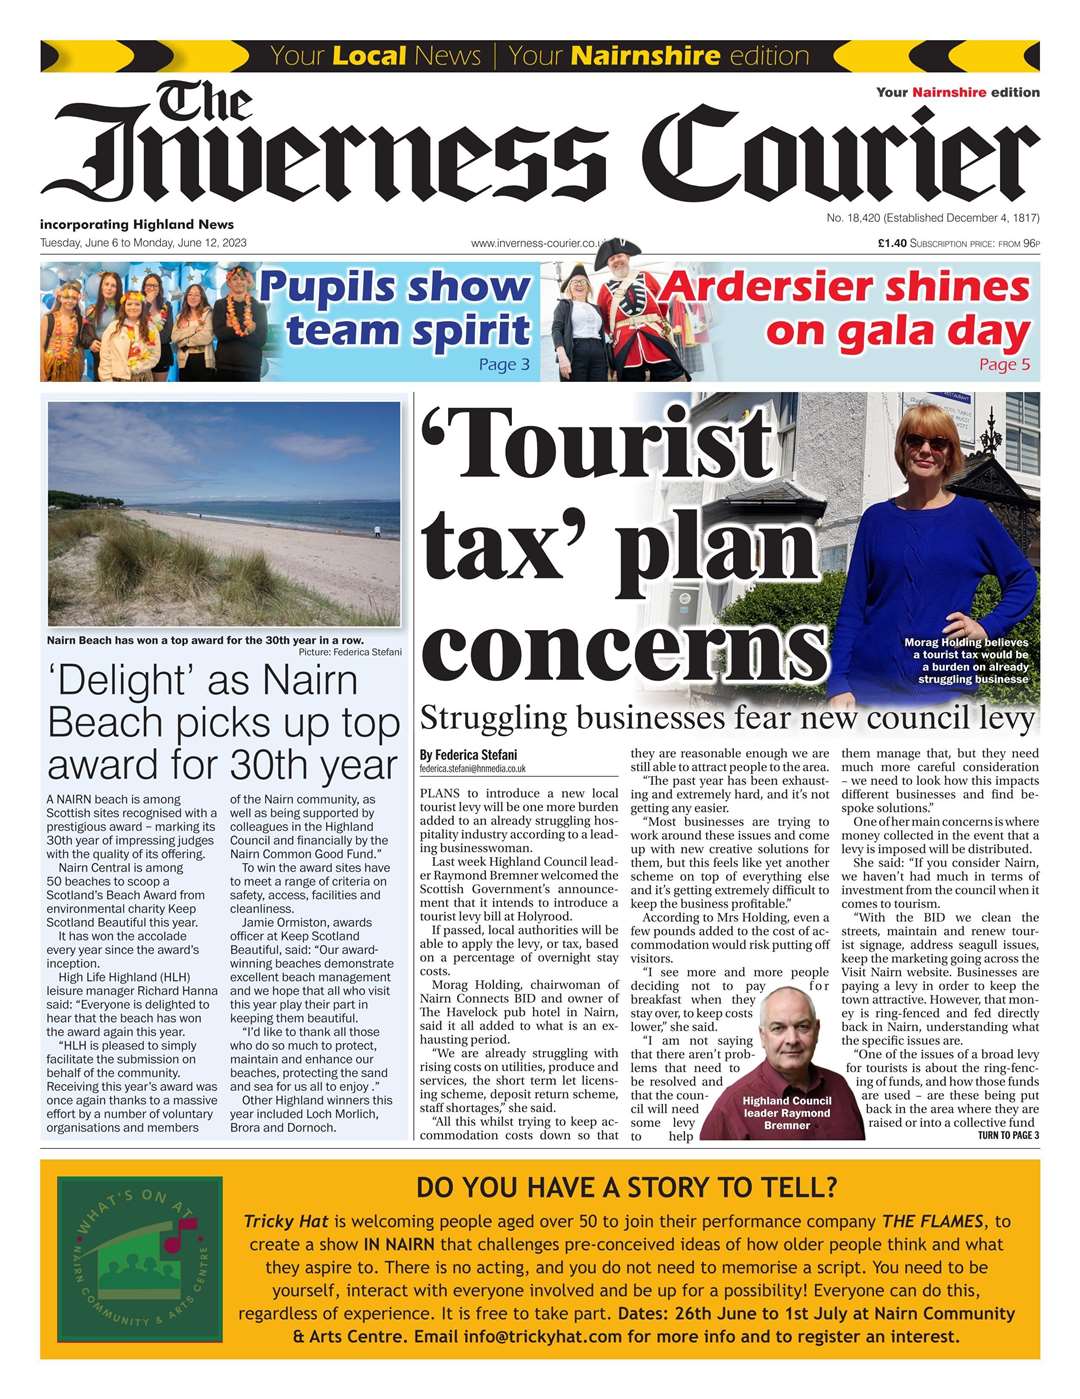 The Inverness Courier (Nairnshire edition), June 6, front page.